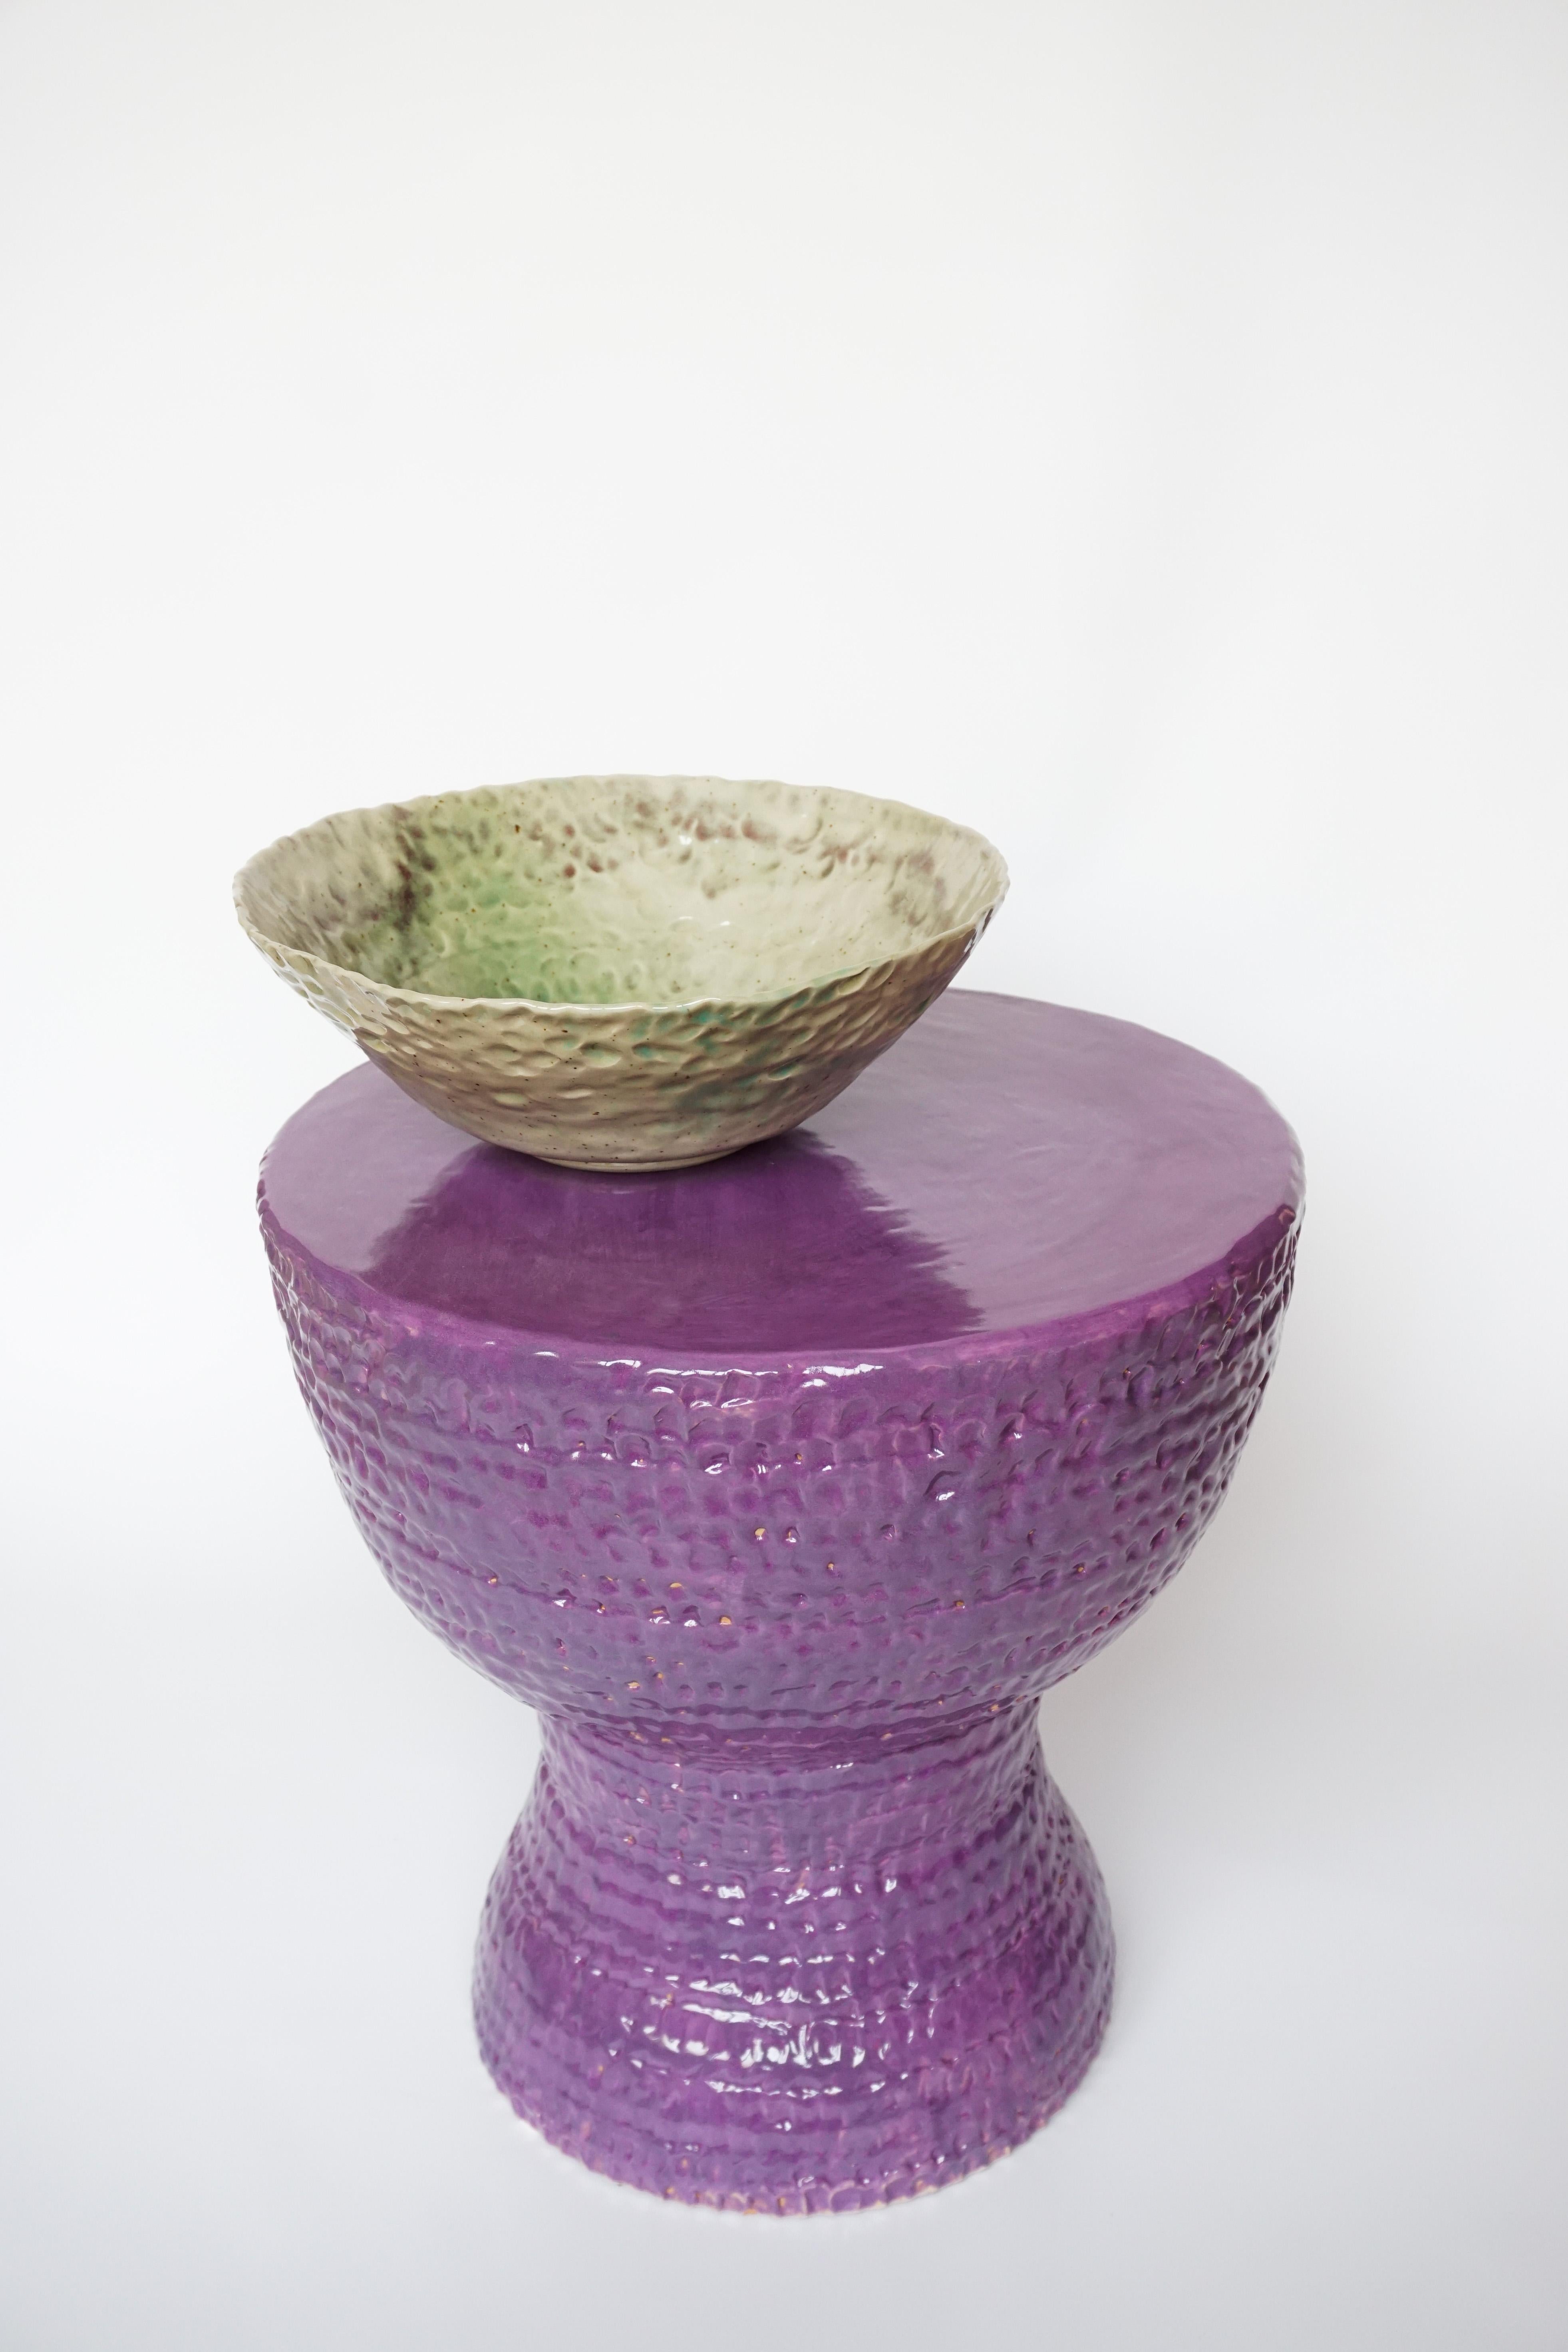 Purple Lipstick Taburette & Green Bowl by Arina Antonova
Dimensions: H 40 x D 35 cm
Materials: terracotta, glaze, pigment.

Born in Sewastopol (Crimea), I was surrounded by the natural variety of the coastal Black Sea views with rocky beaches and